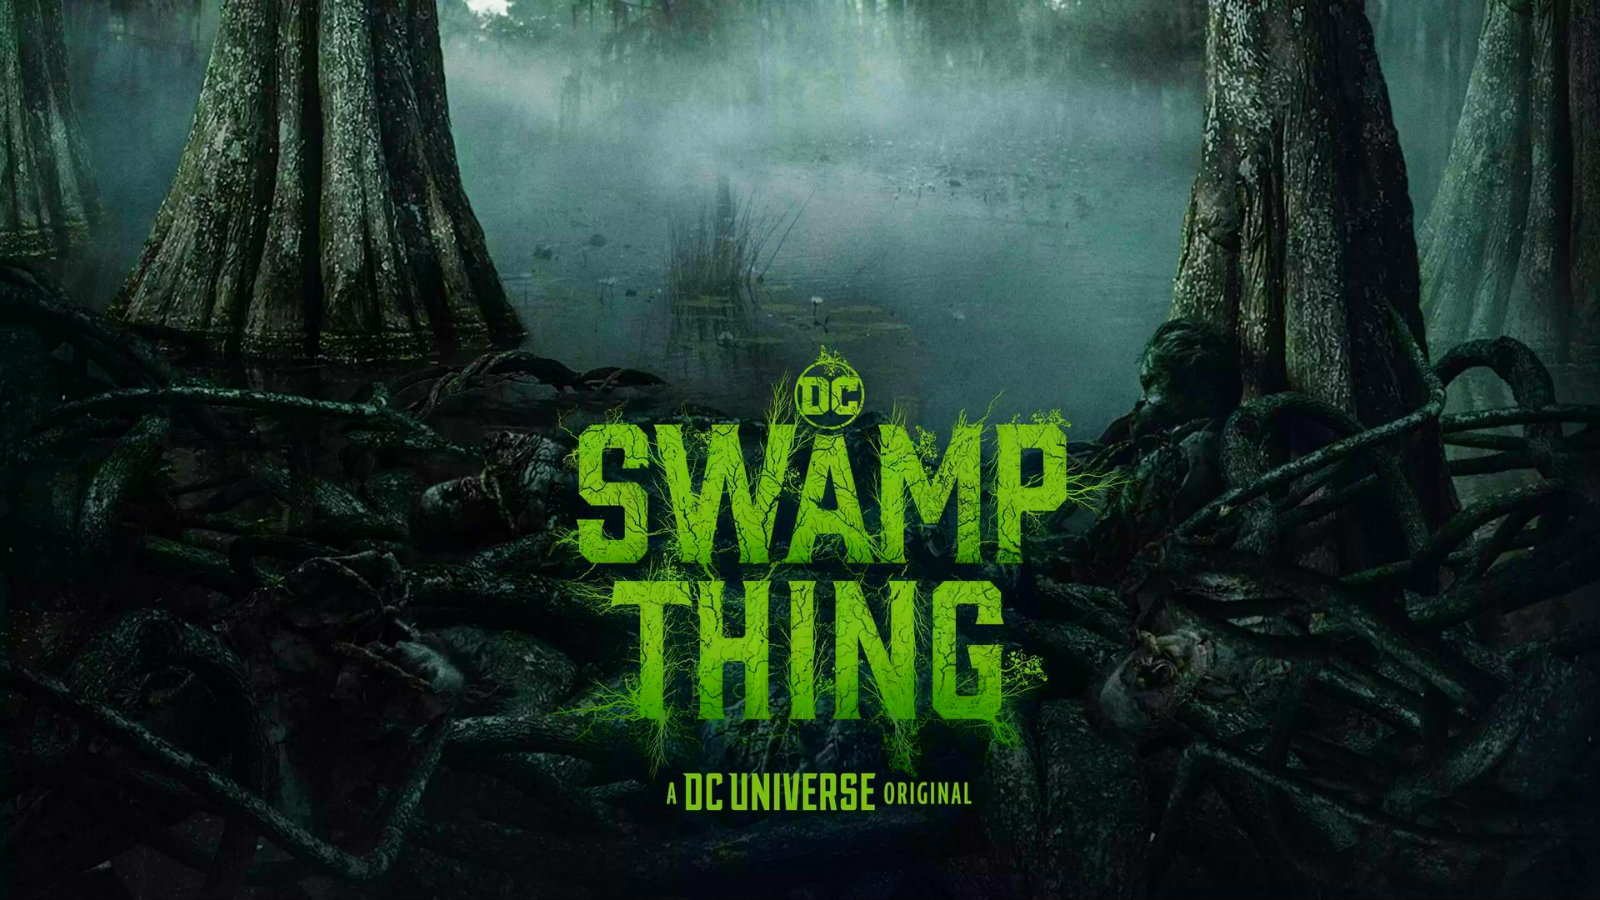 Swamp Thing Images on Fanpop.